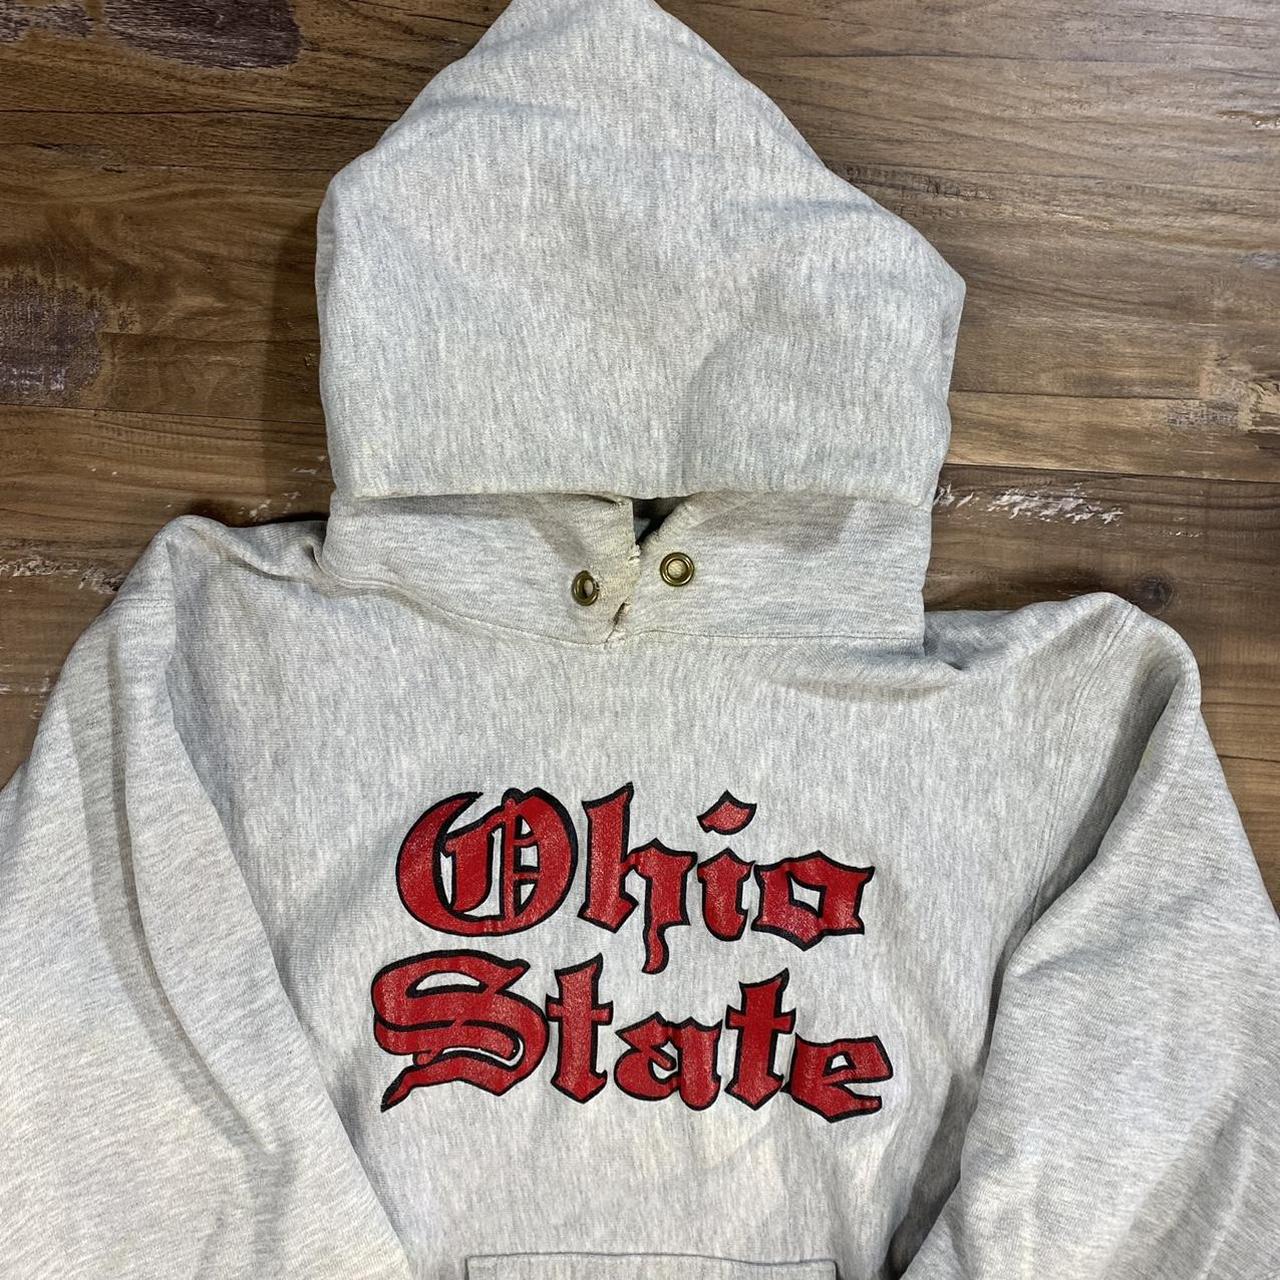 Vintage 80s Ohio state old English reverse weave - Depop